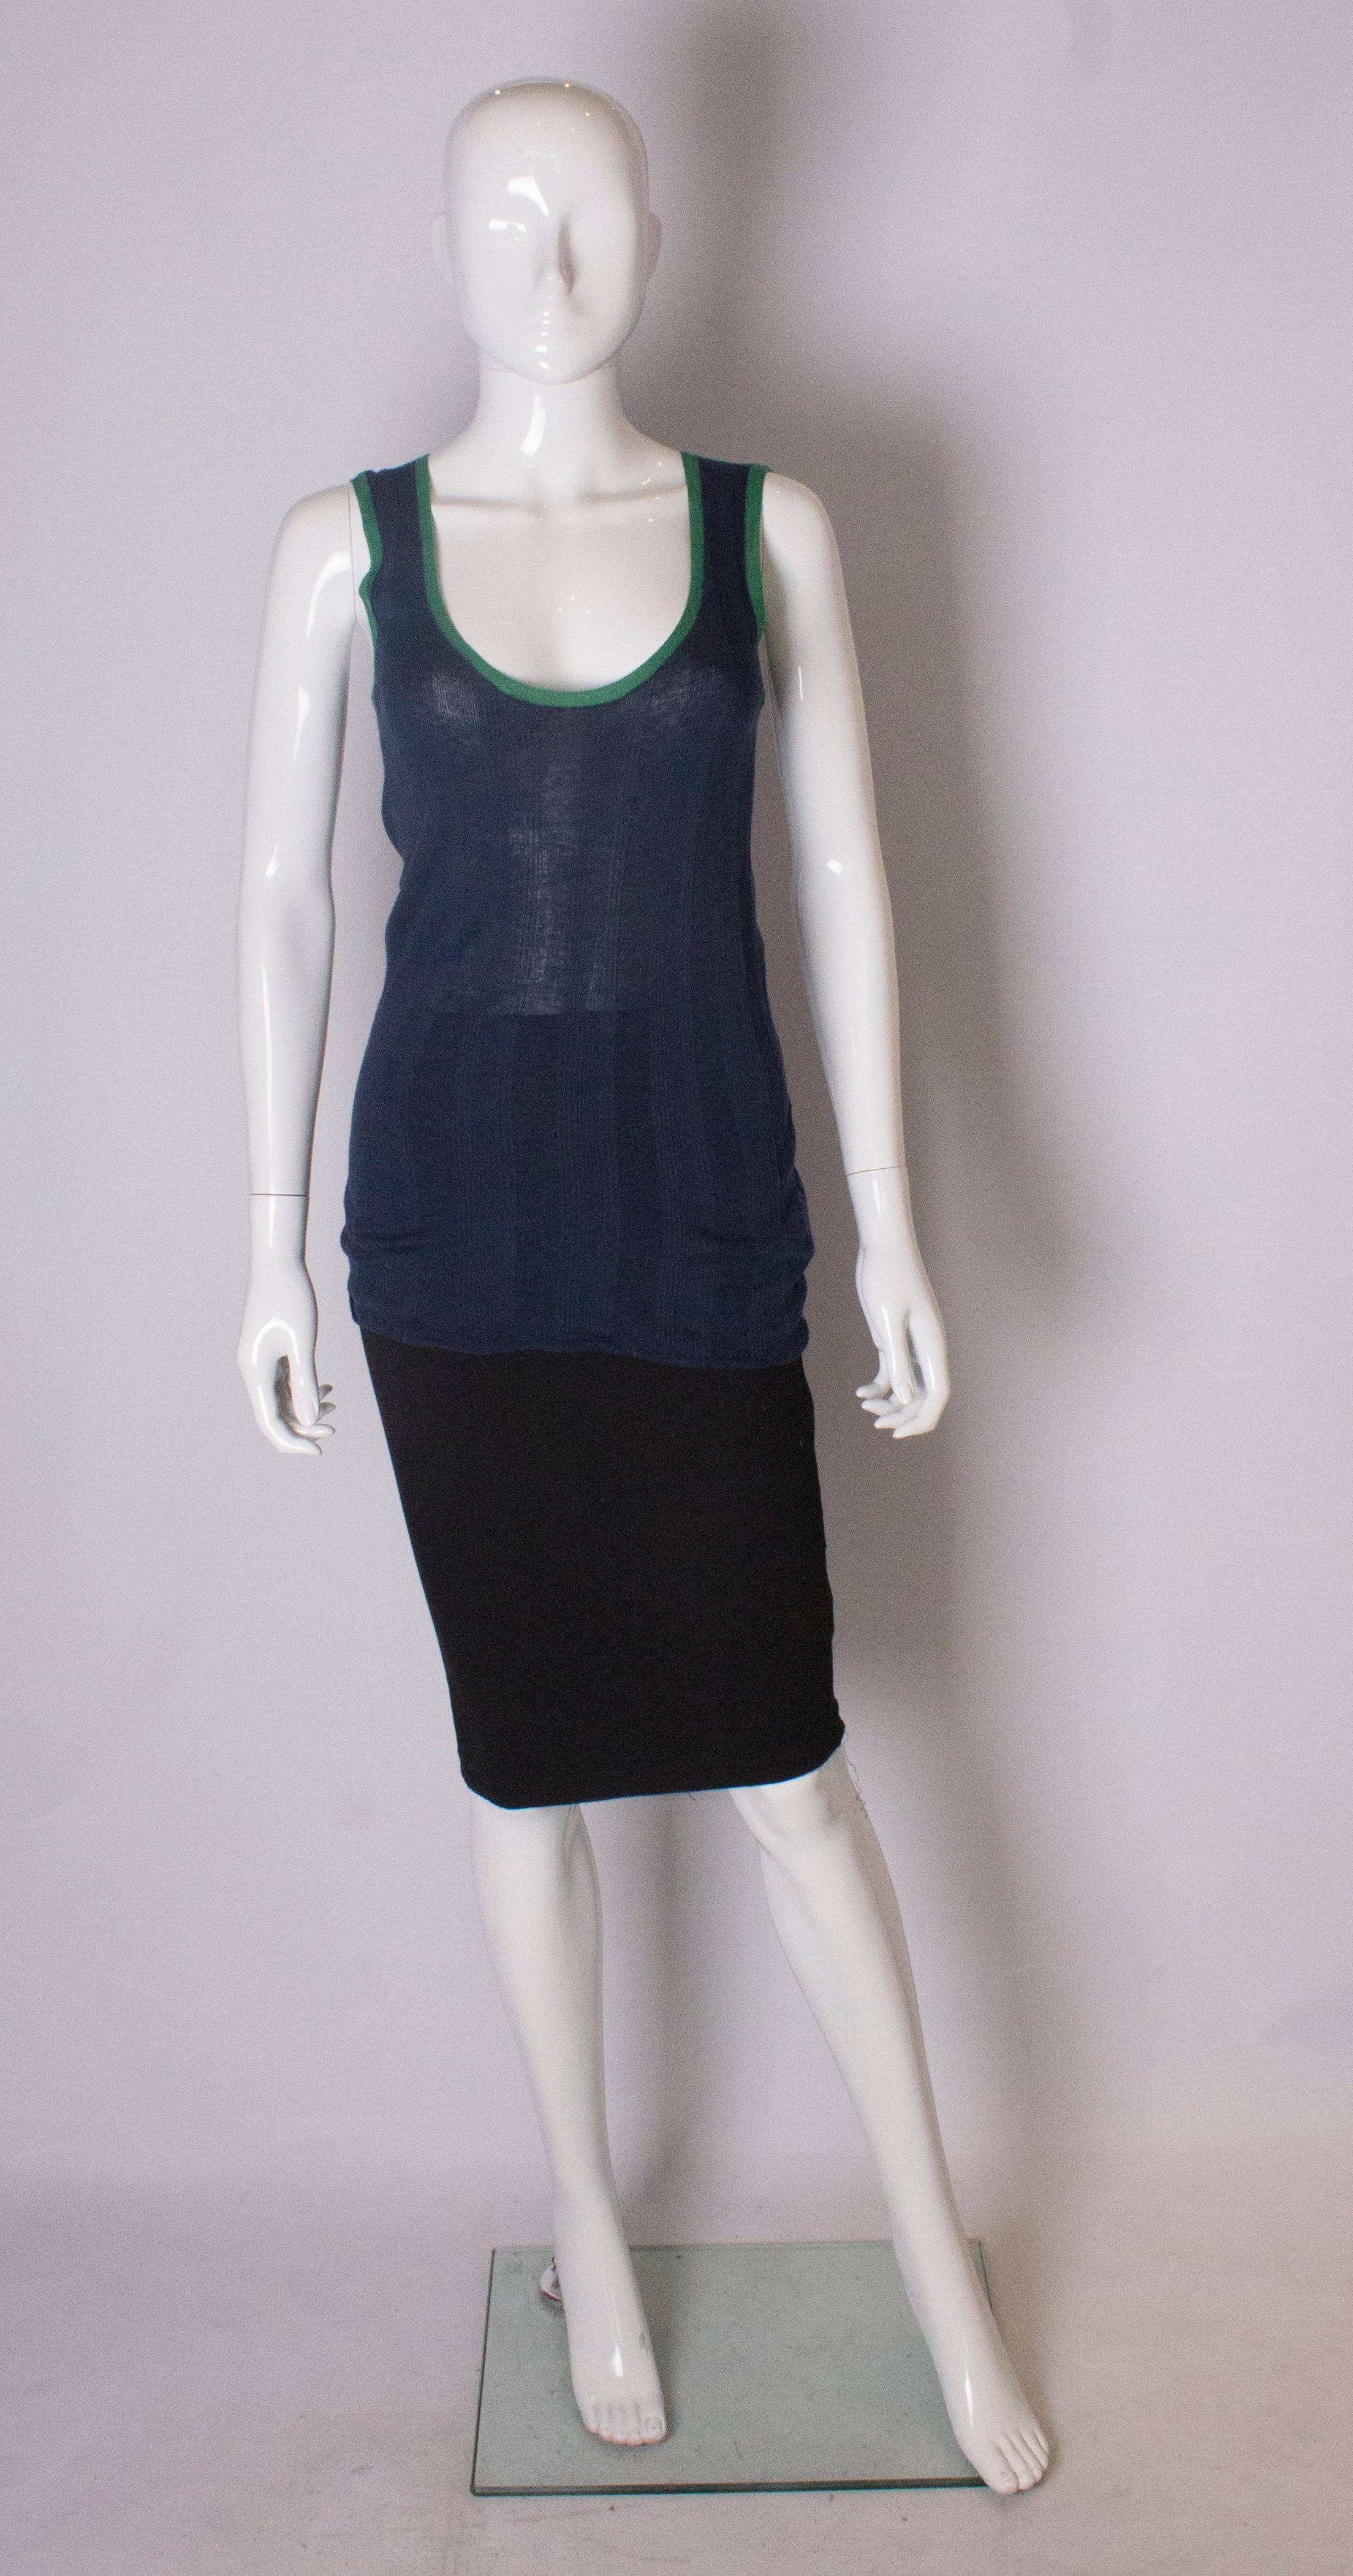  A chic top by Yves Saint Laurent. The top is in a silk mix, 53% silk, 42% cotton and 5% cashmere, an ideal weight for summer. In a navy blue ribbed knit with green trim this is a chic addition to any wardrobe.